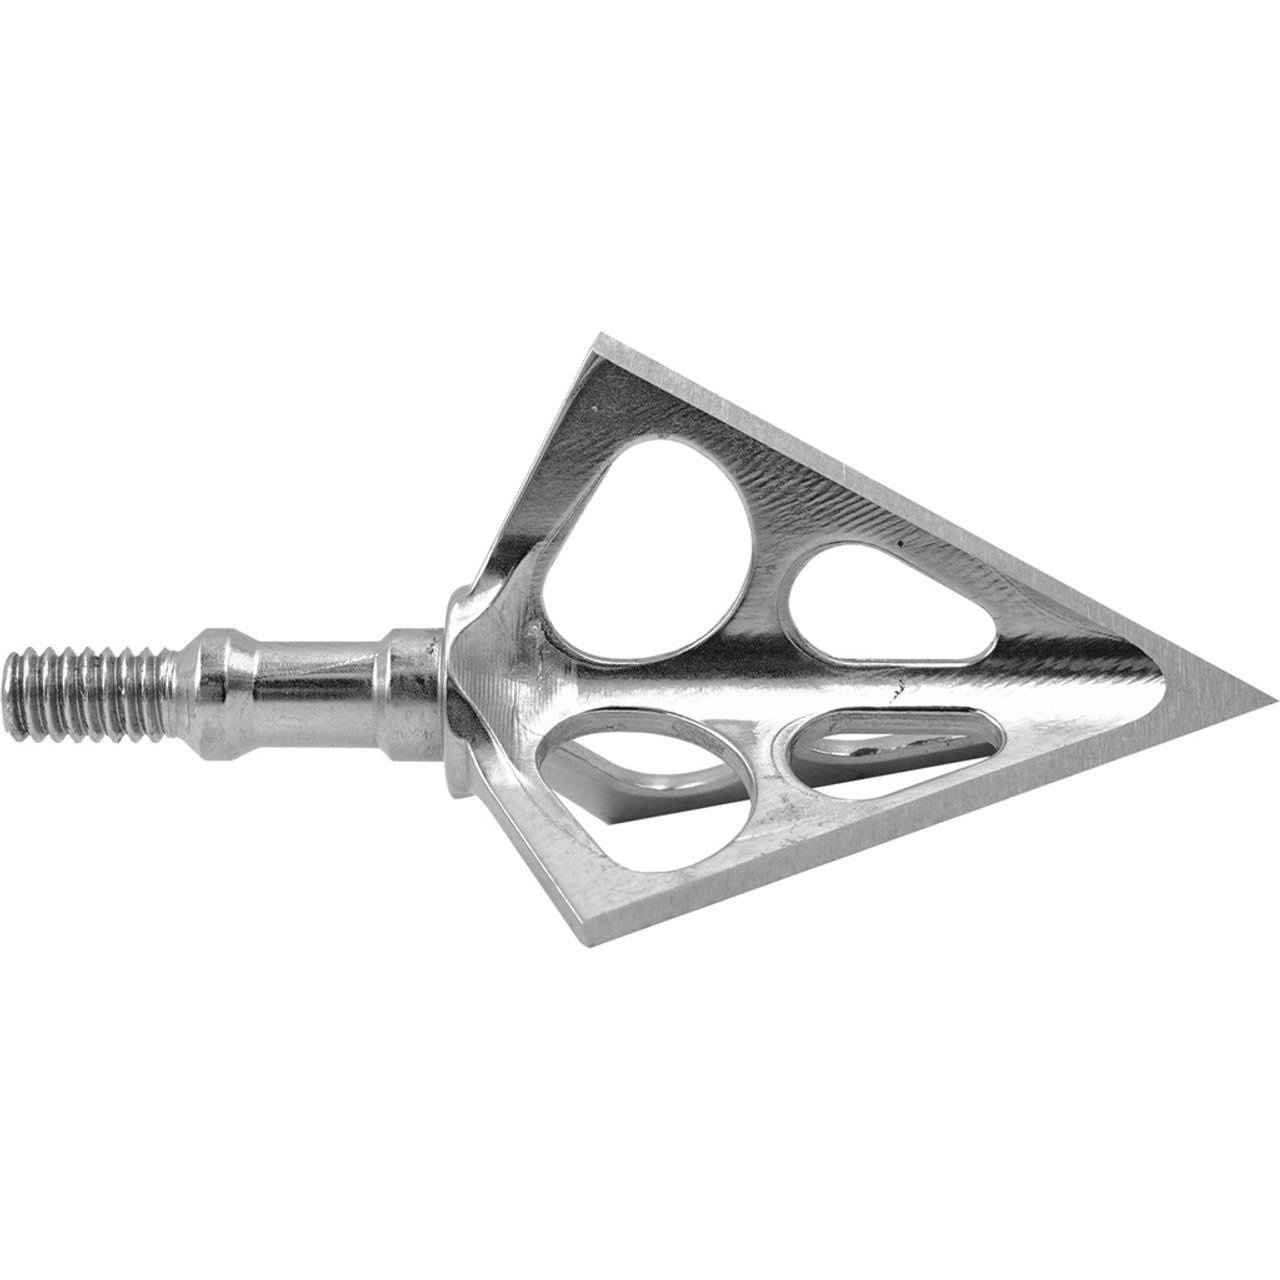 Muzzy One Crossbow Broadheads 100 Gr 3 Pack 1001670 Safford Trading Company 3213